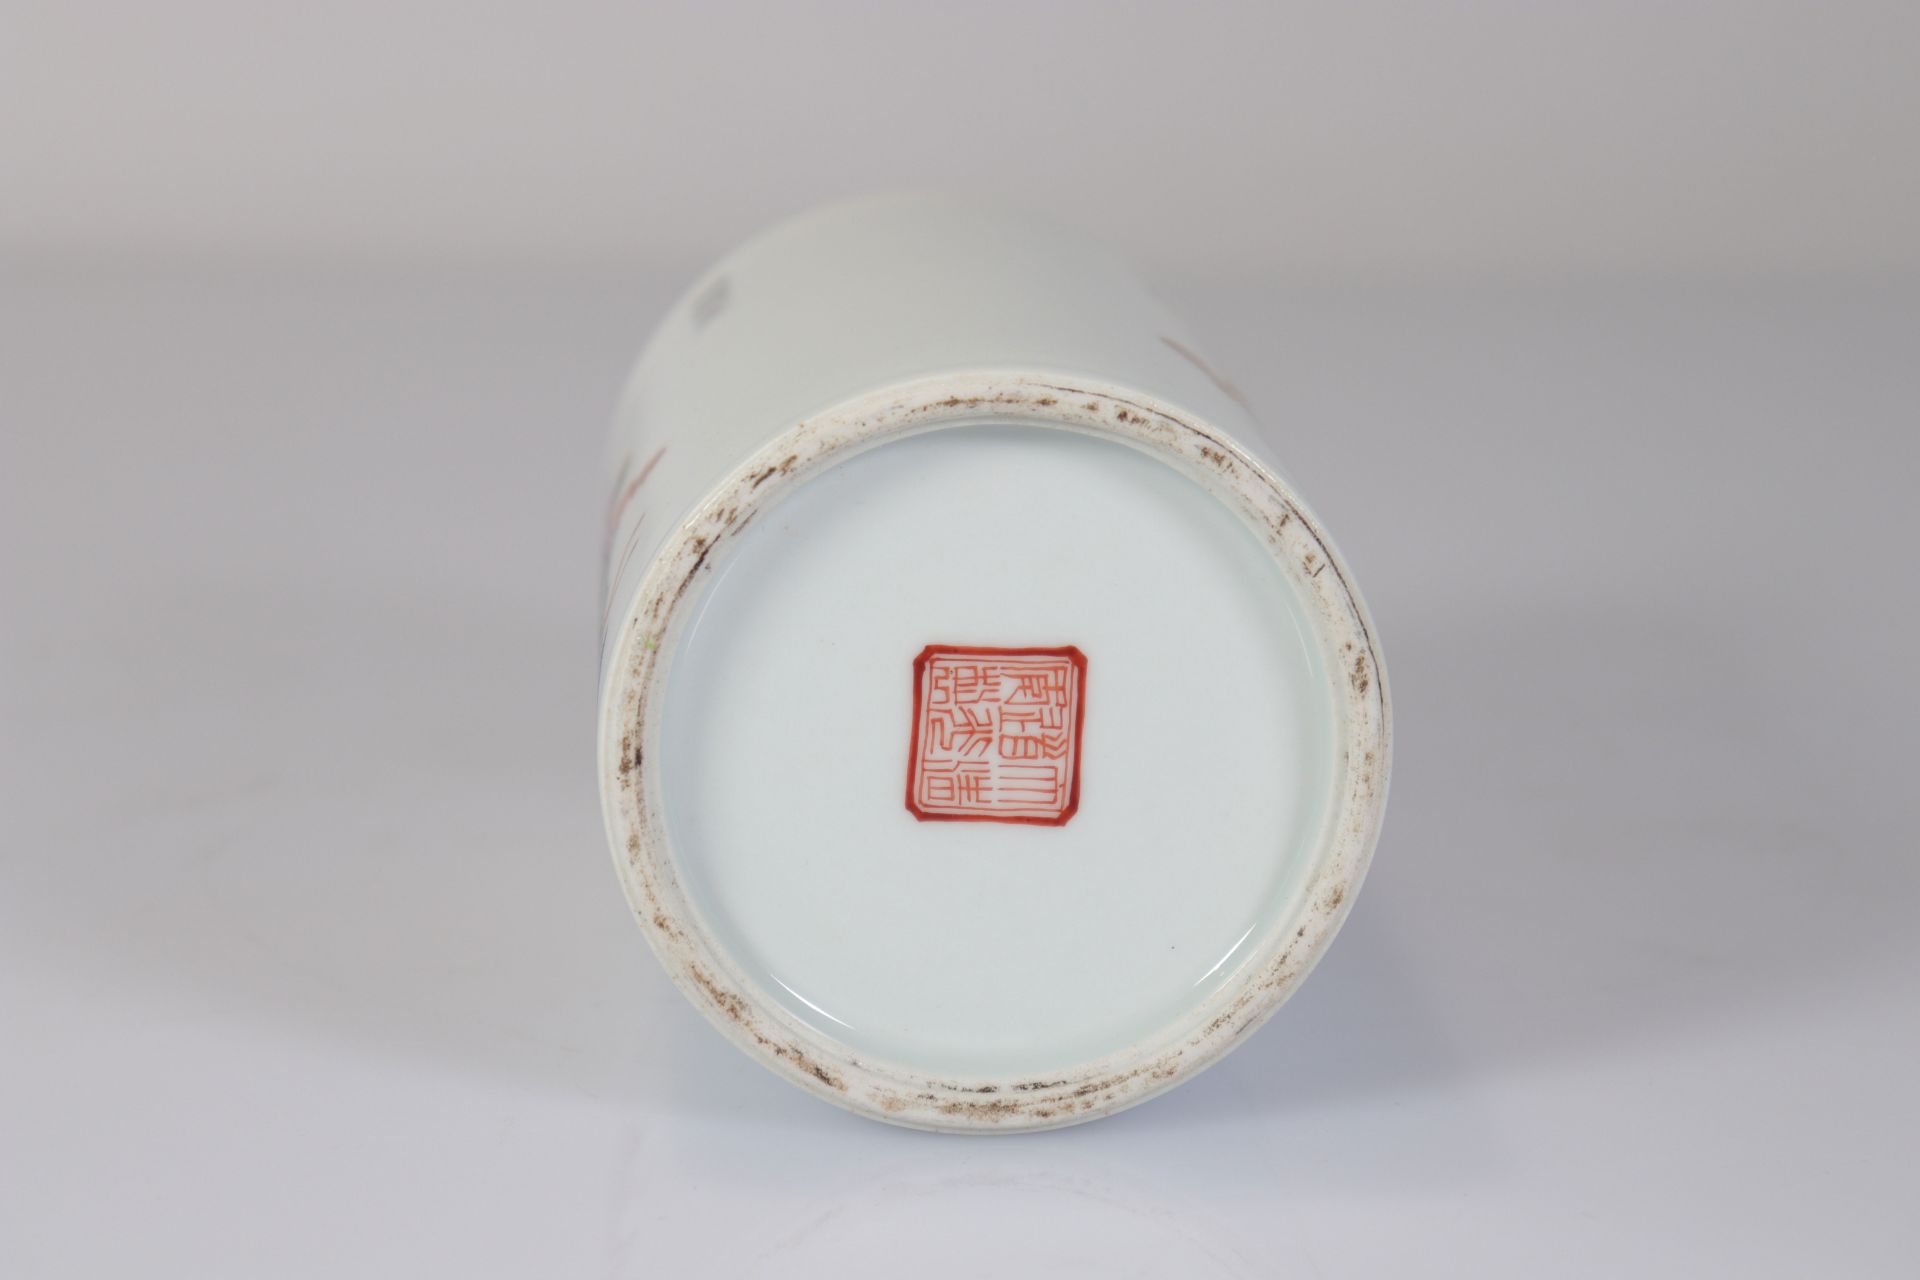 China brush holder decorated with characters - Image 4 of 4